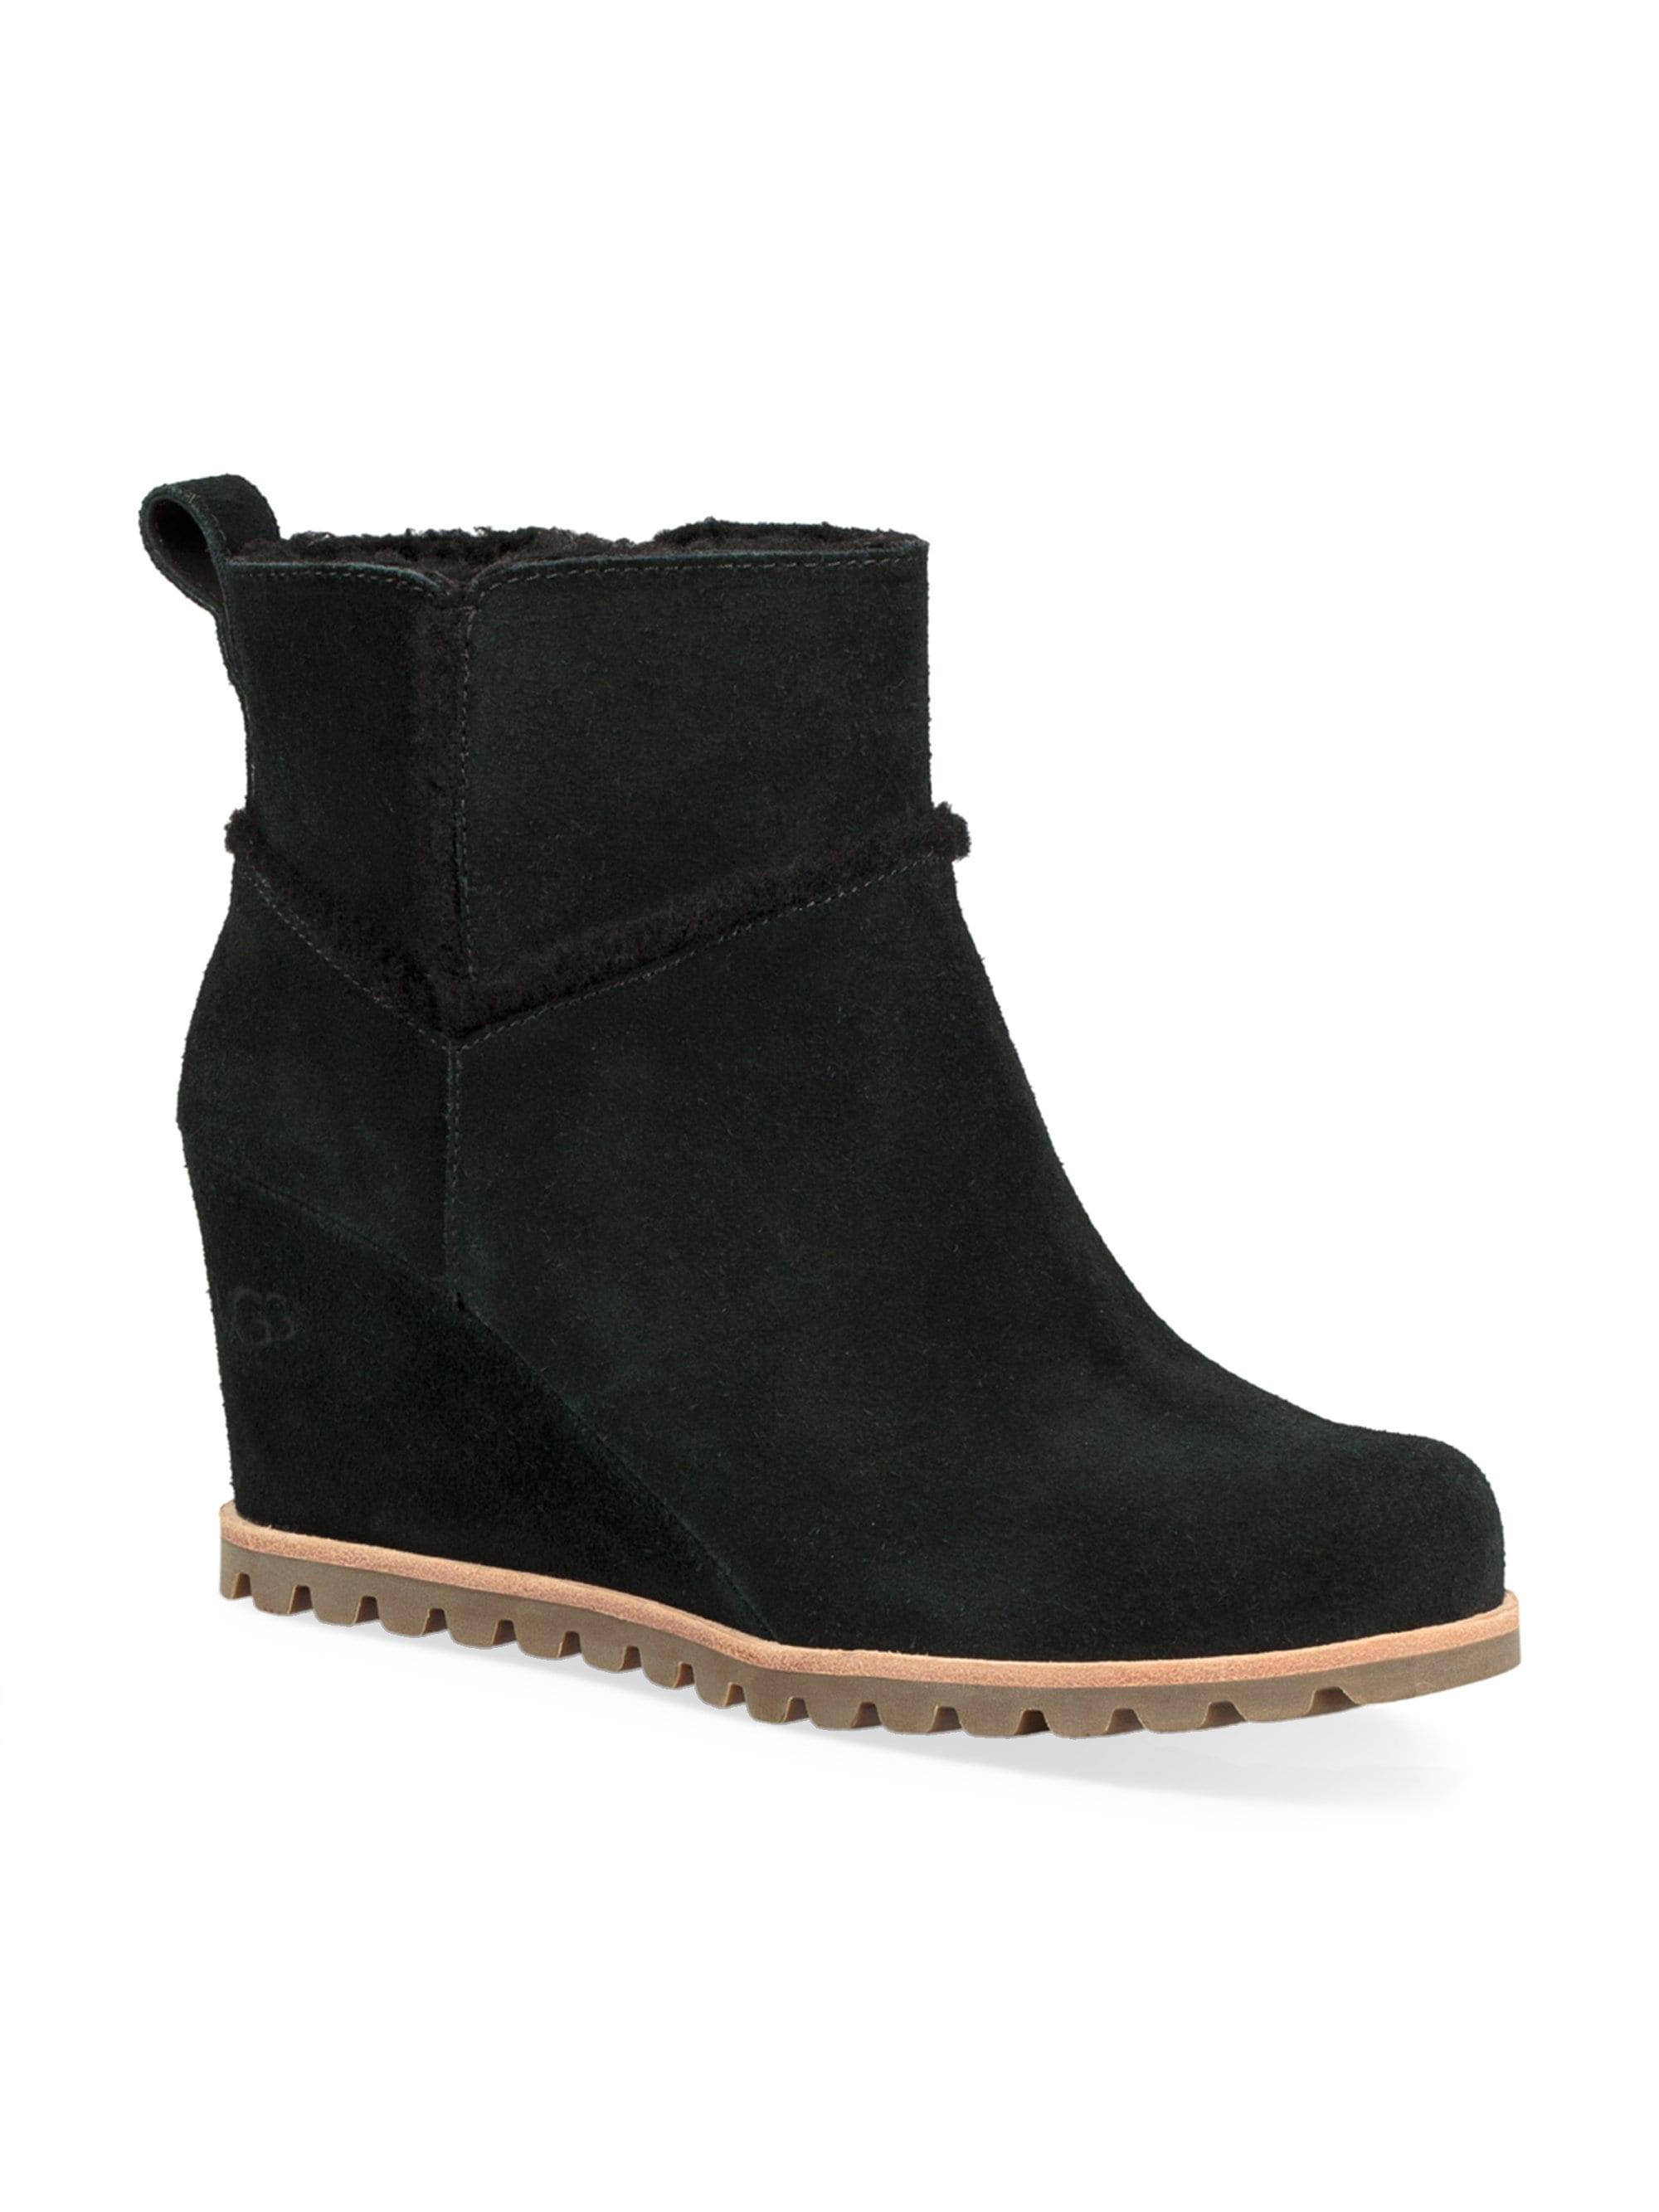 UGG Marte Suede Wedge Boots in Black | Lyst